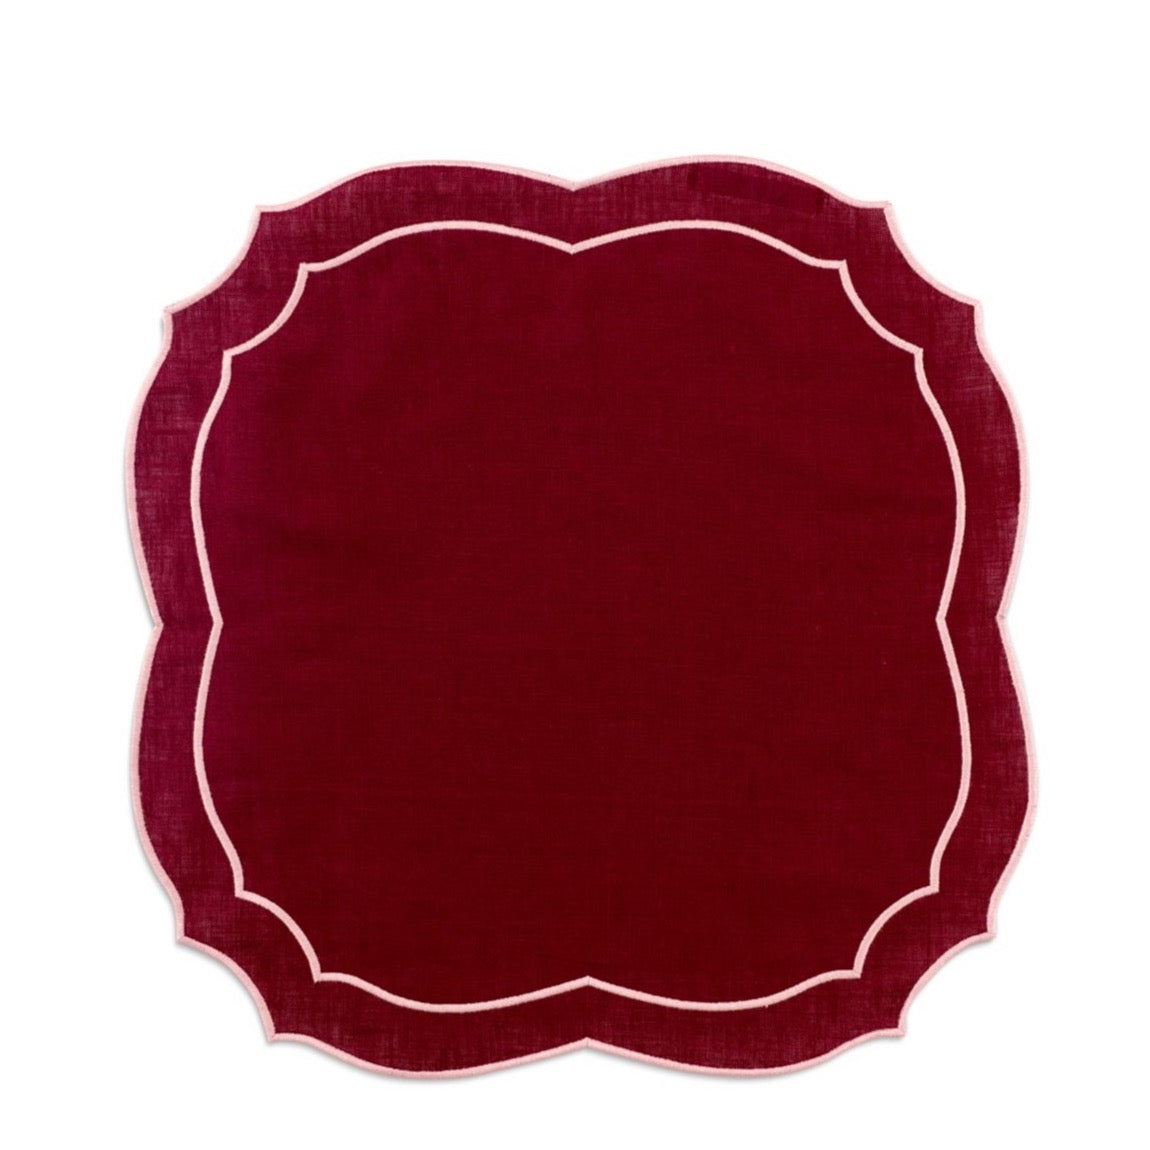 Emma Linen Napkin in Burgundy with Rose Embroidery